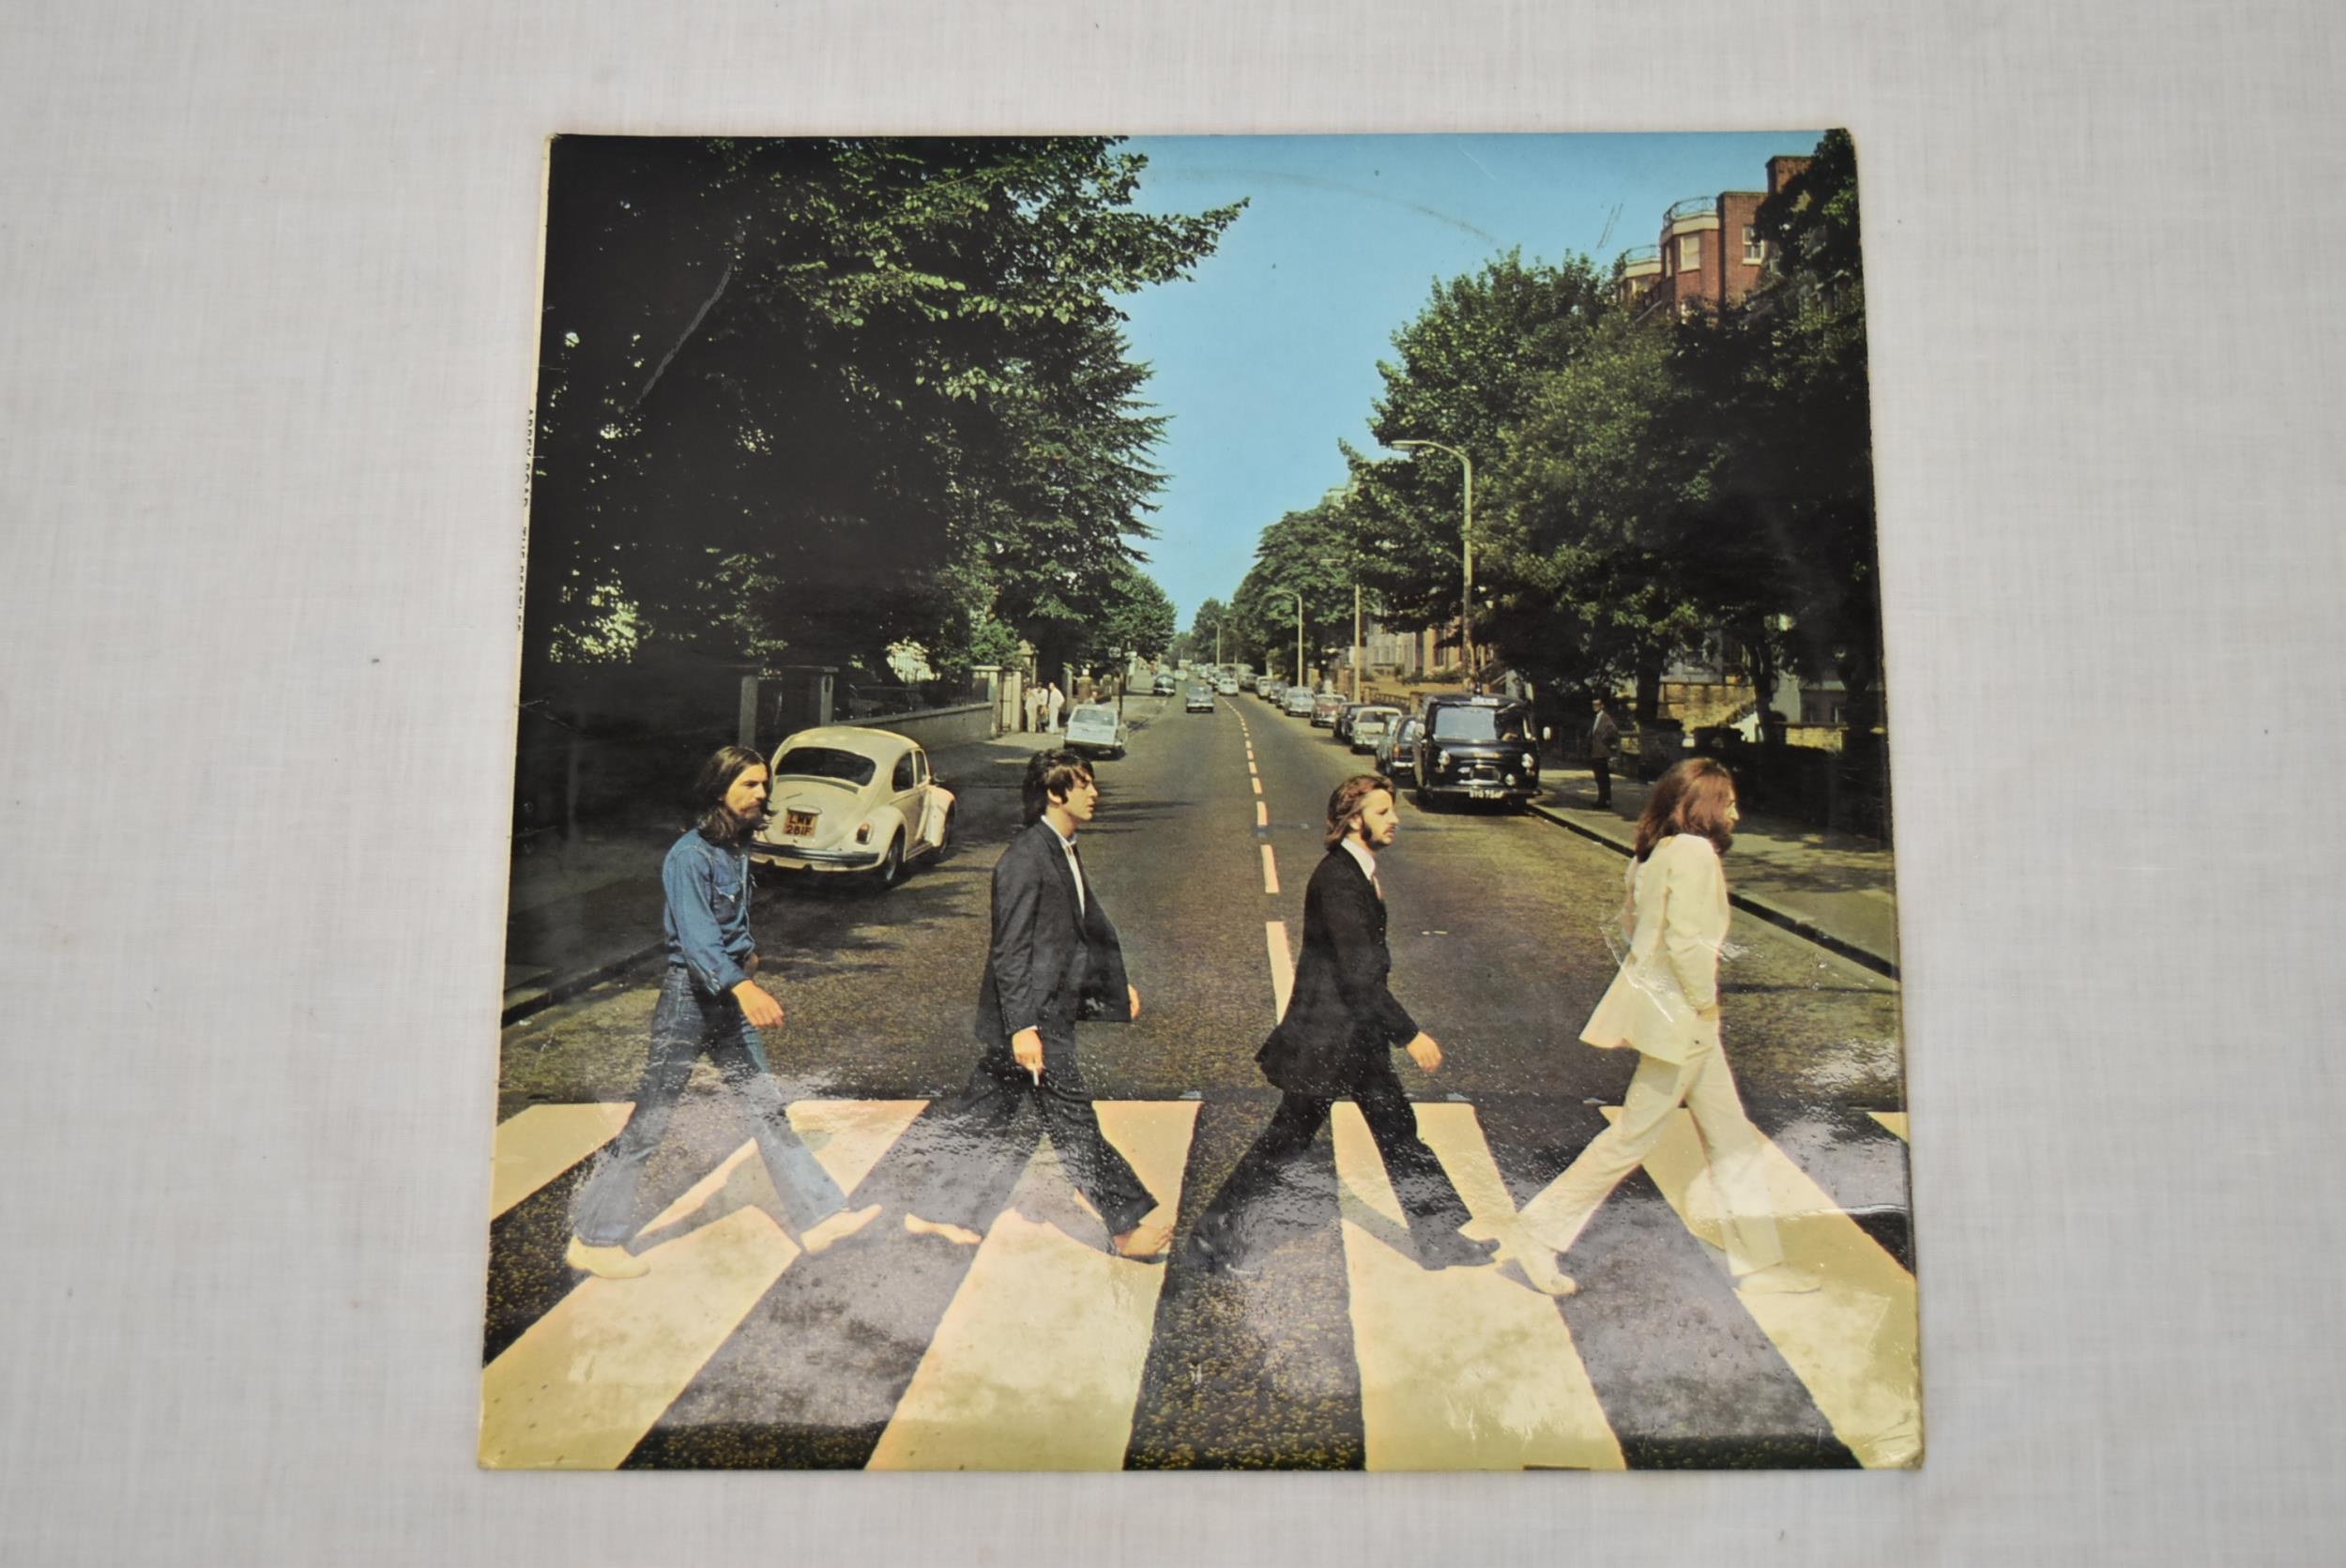 Beatles, Abbey Road. UK first pressing. Rare LP cover with misprints. Good condition.